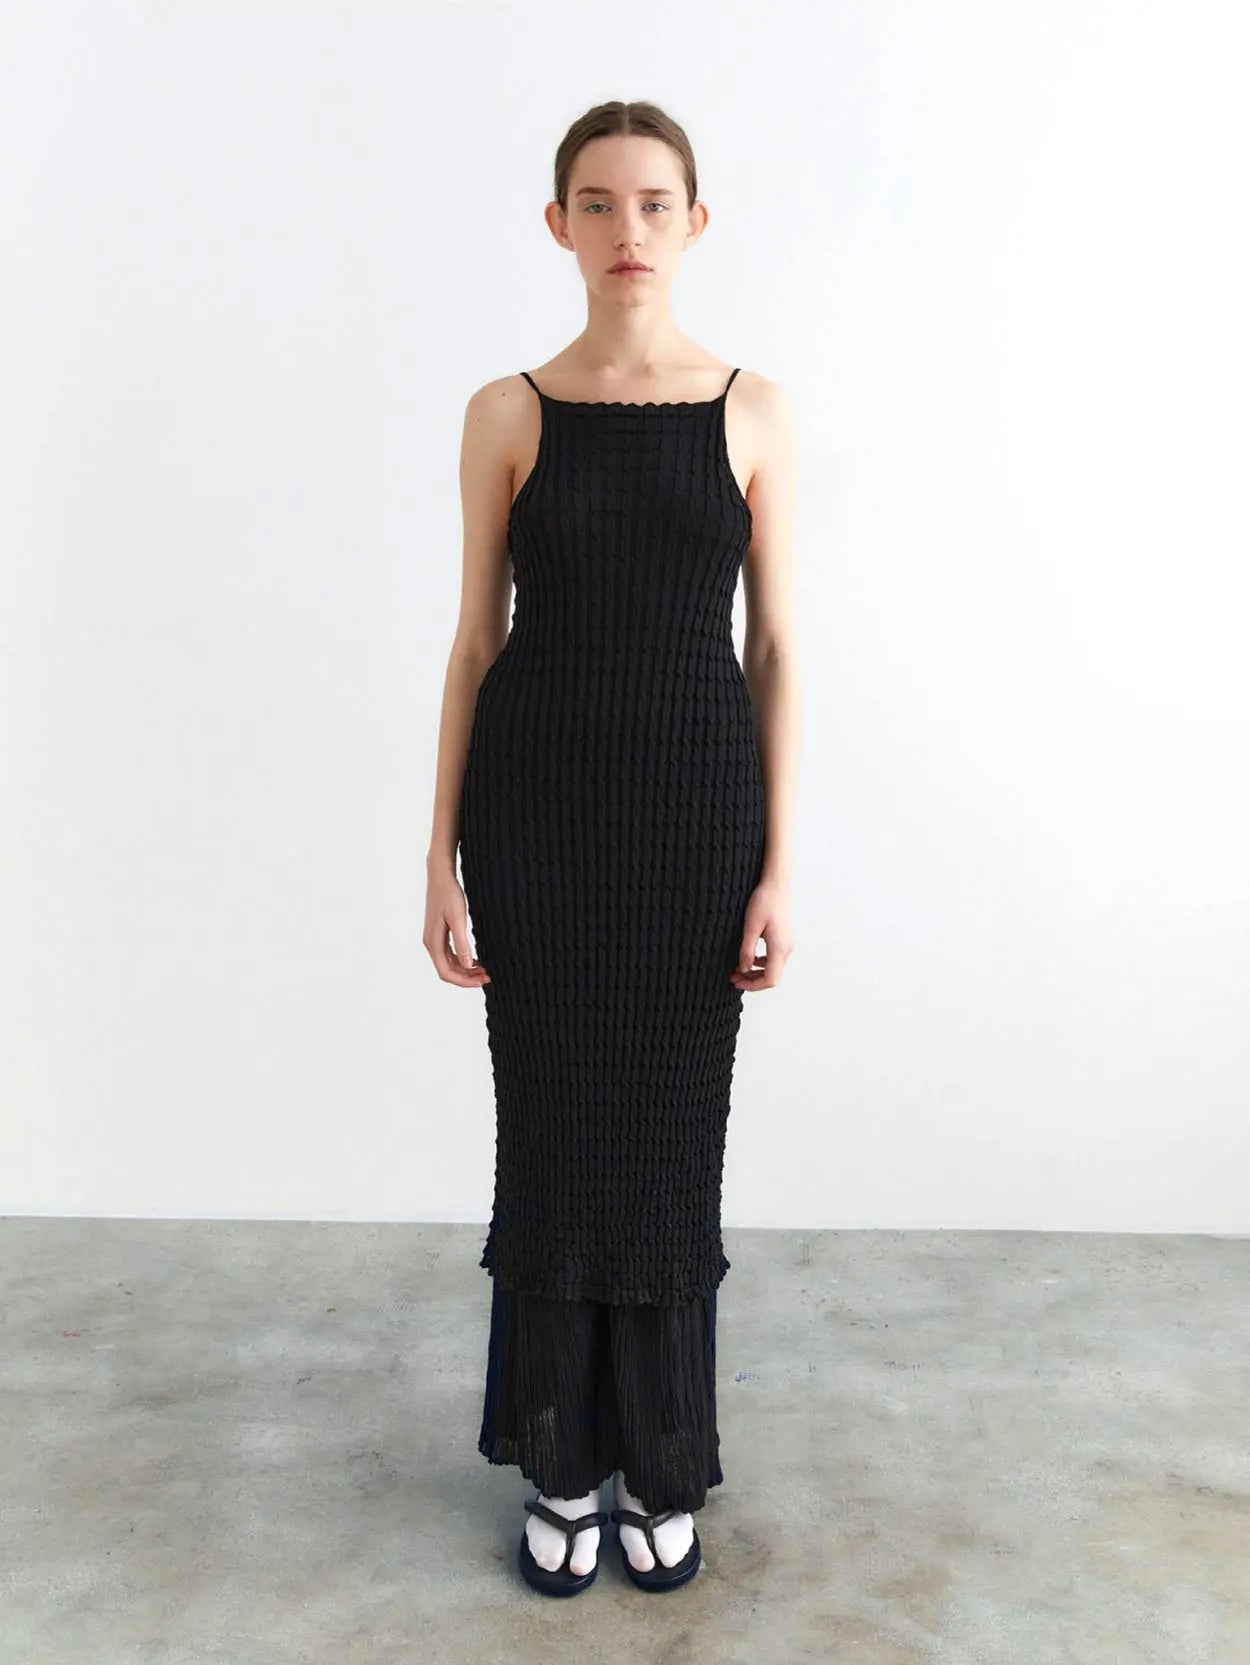 A long, sleeveless black dress with thin shoulder straps is displayed against a plain white background. The Rina Dress Black by Rus, featured at Bassalstore in Barcelona, boasts textured, crinkled fabric and a straight, narrow silhouette.